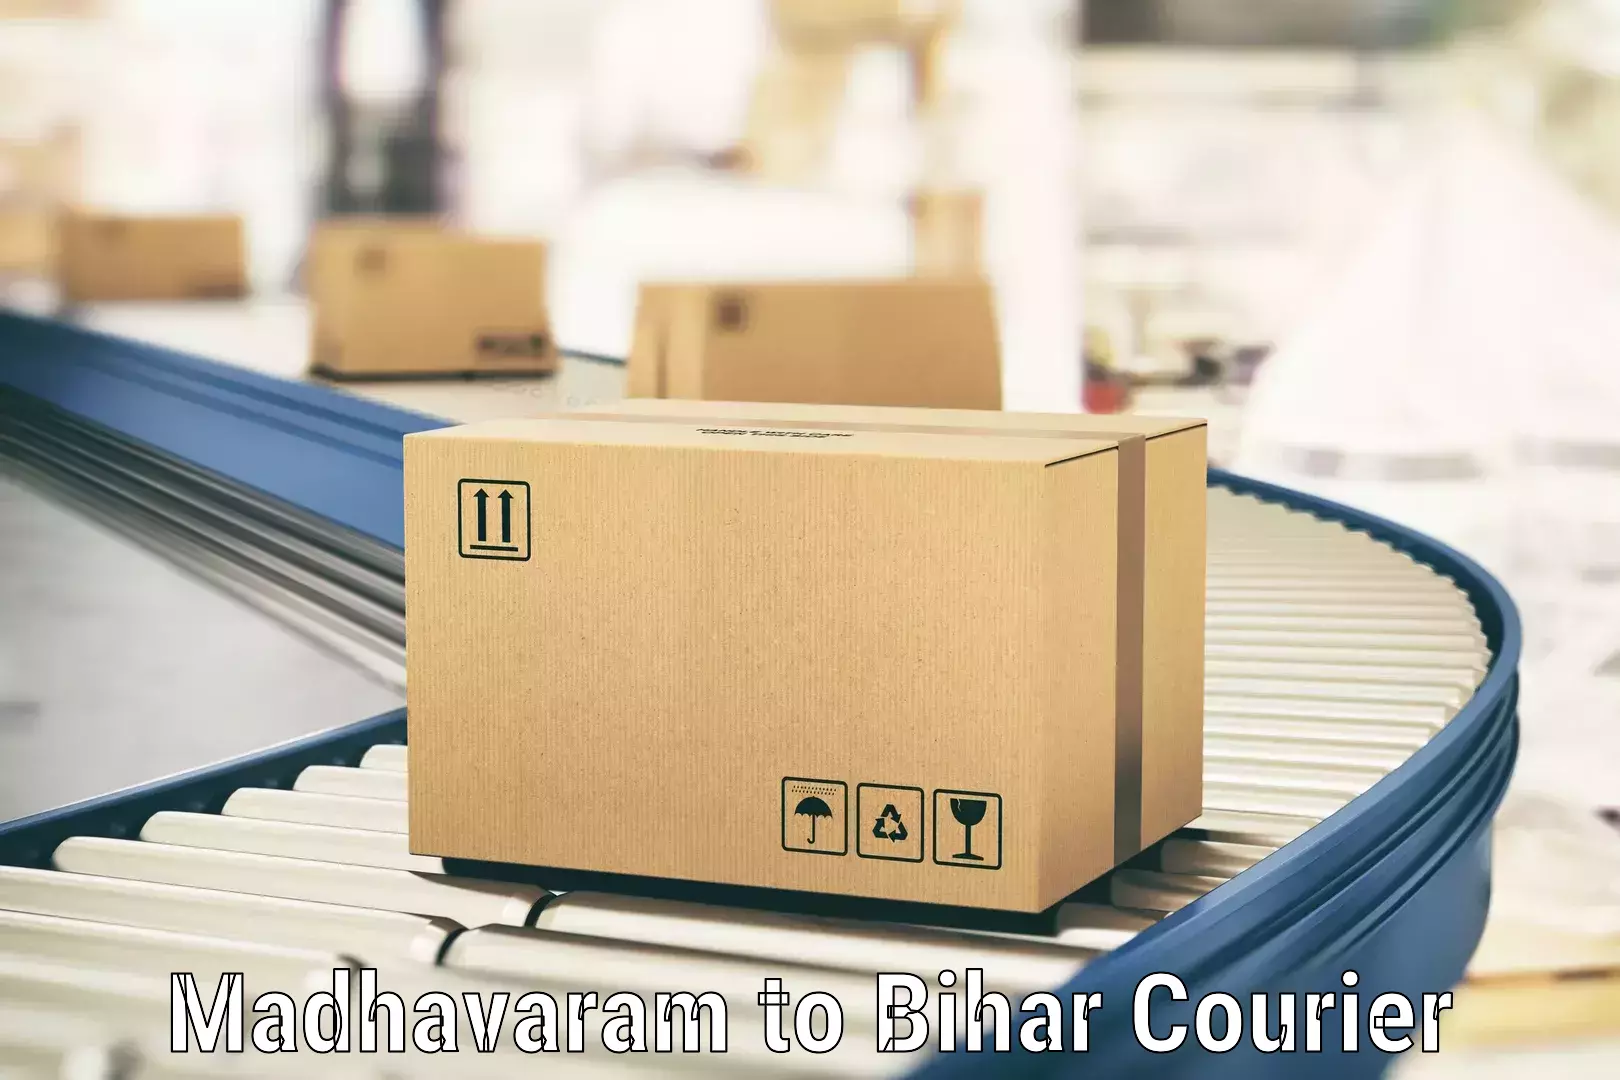 State-of-the-art courier technology Madhavaram to Jagdishpur Bhojpur